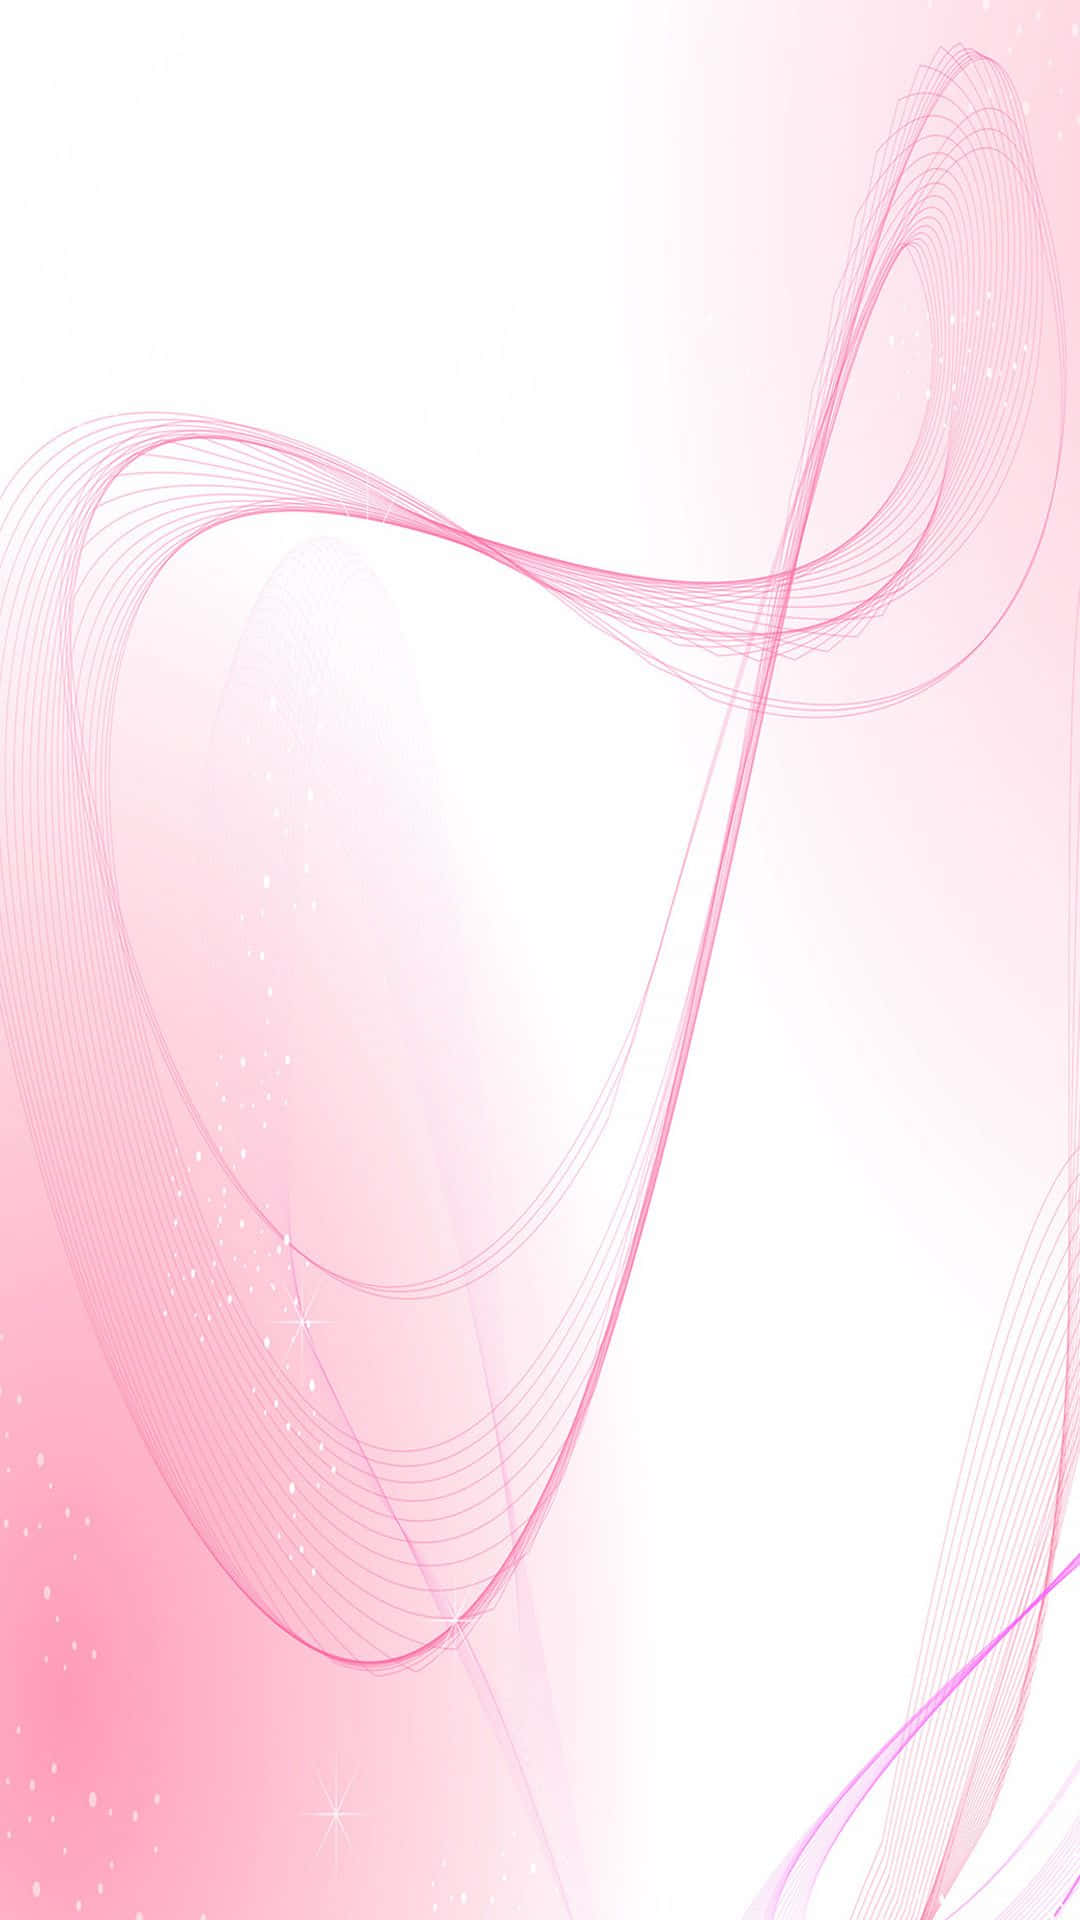 "Stay connected in style with the Elegant Iphone" Wallpaper